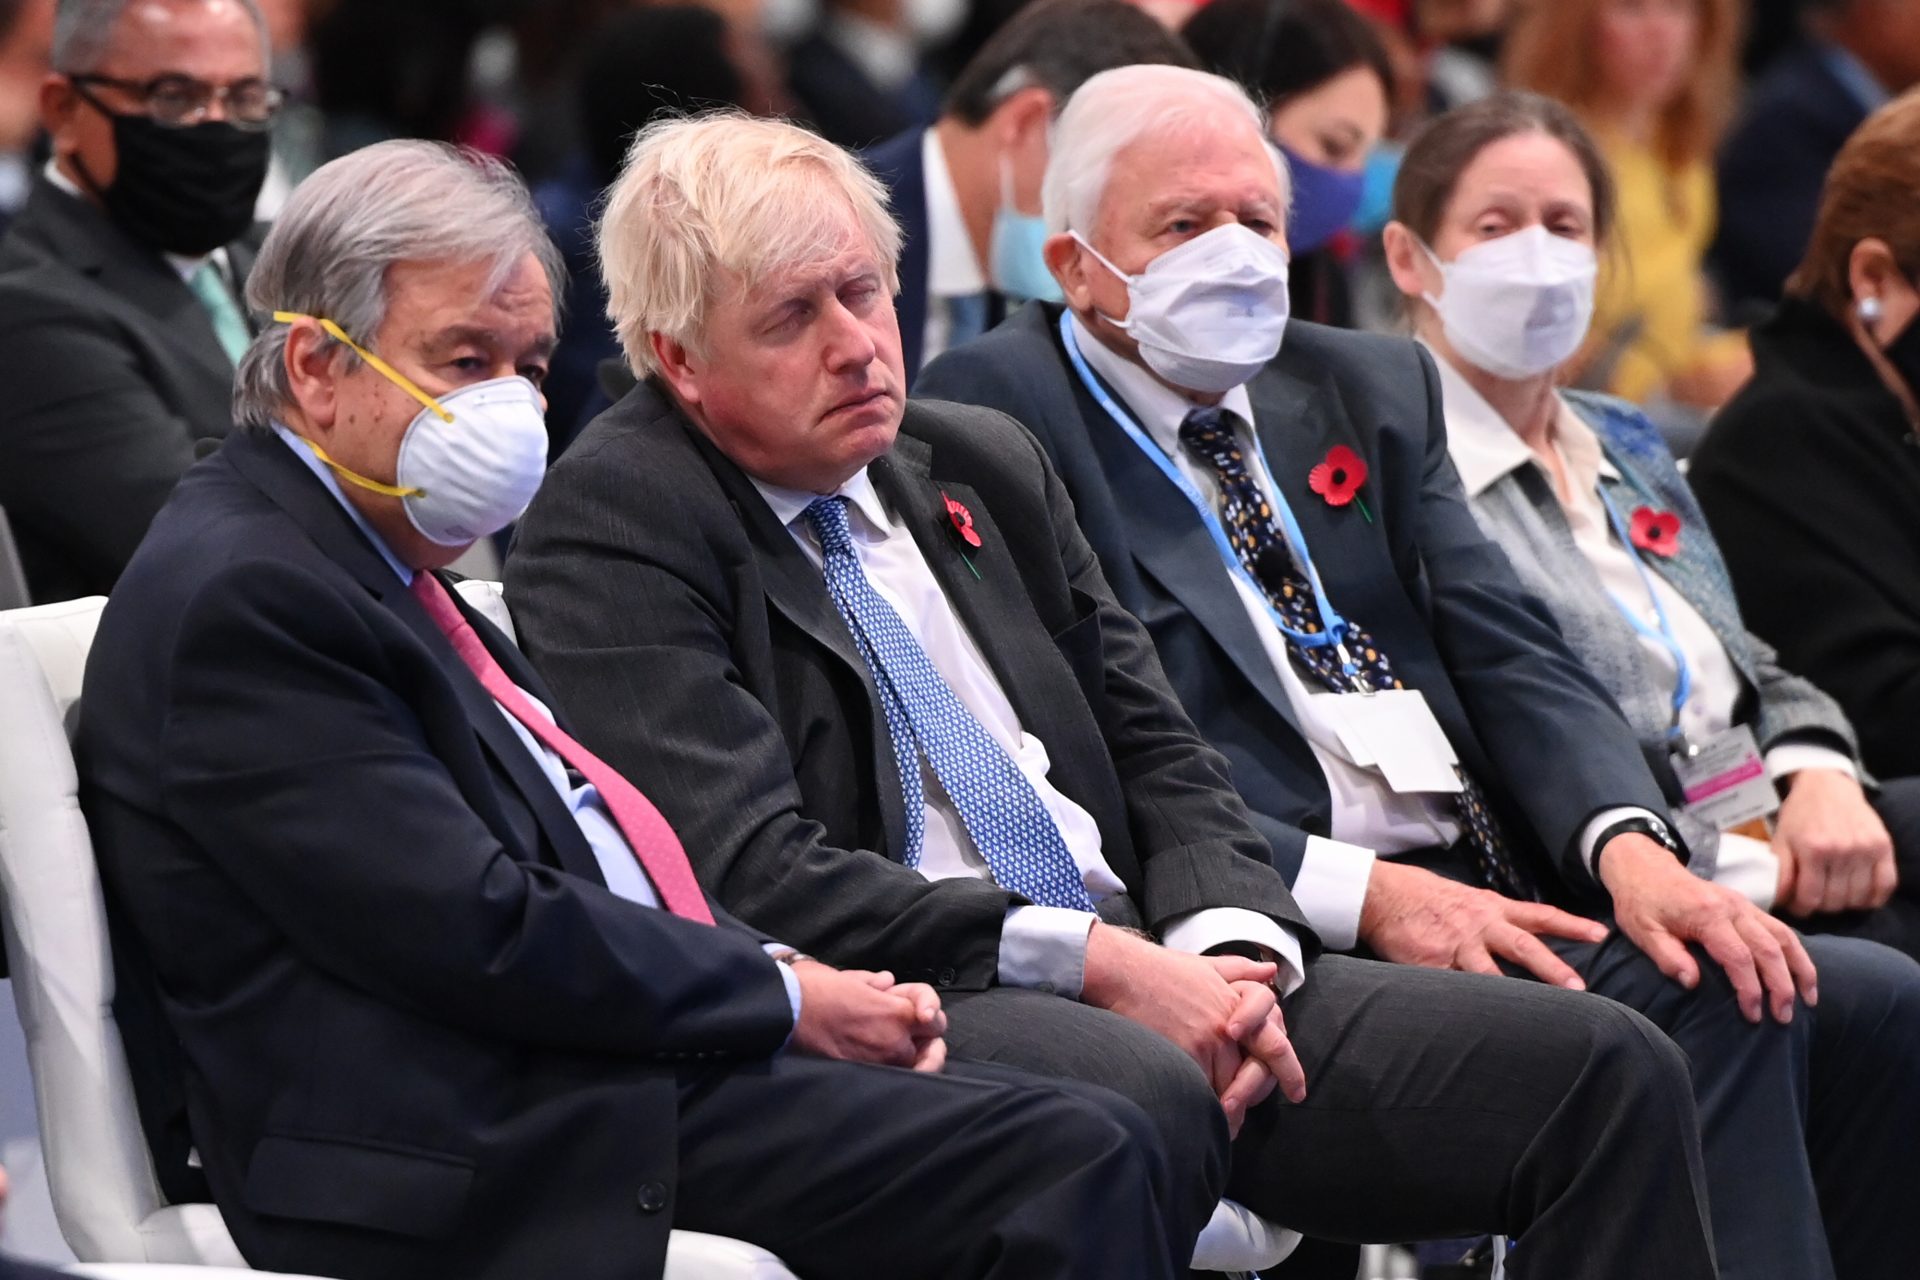 Secretary-General of the United Nations António Guterres, British prime Minister Boris Johnson and Sir David Attenborough attend the opening ceremony of the UN Climate Change Conference. Photo: Jeff J Mitchell/Getty Images